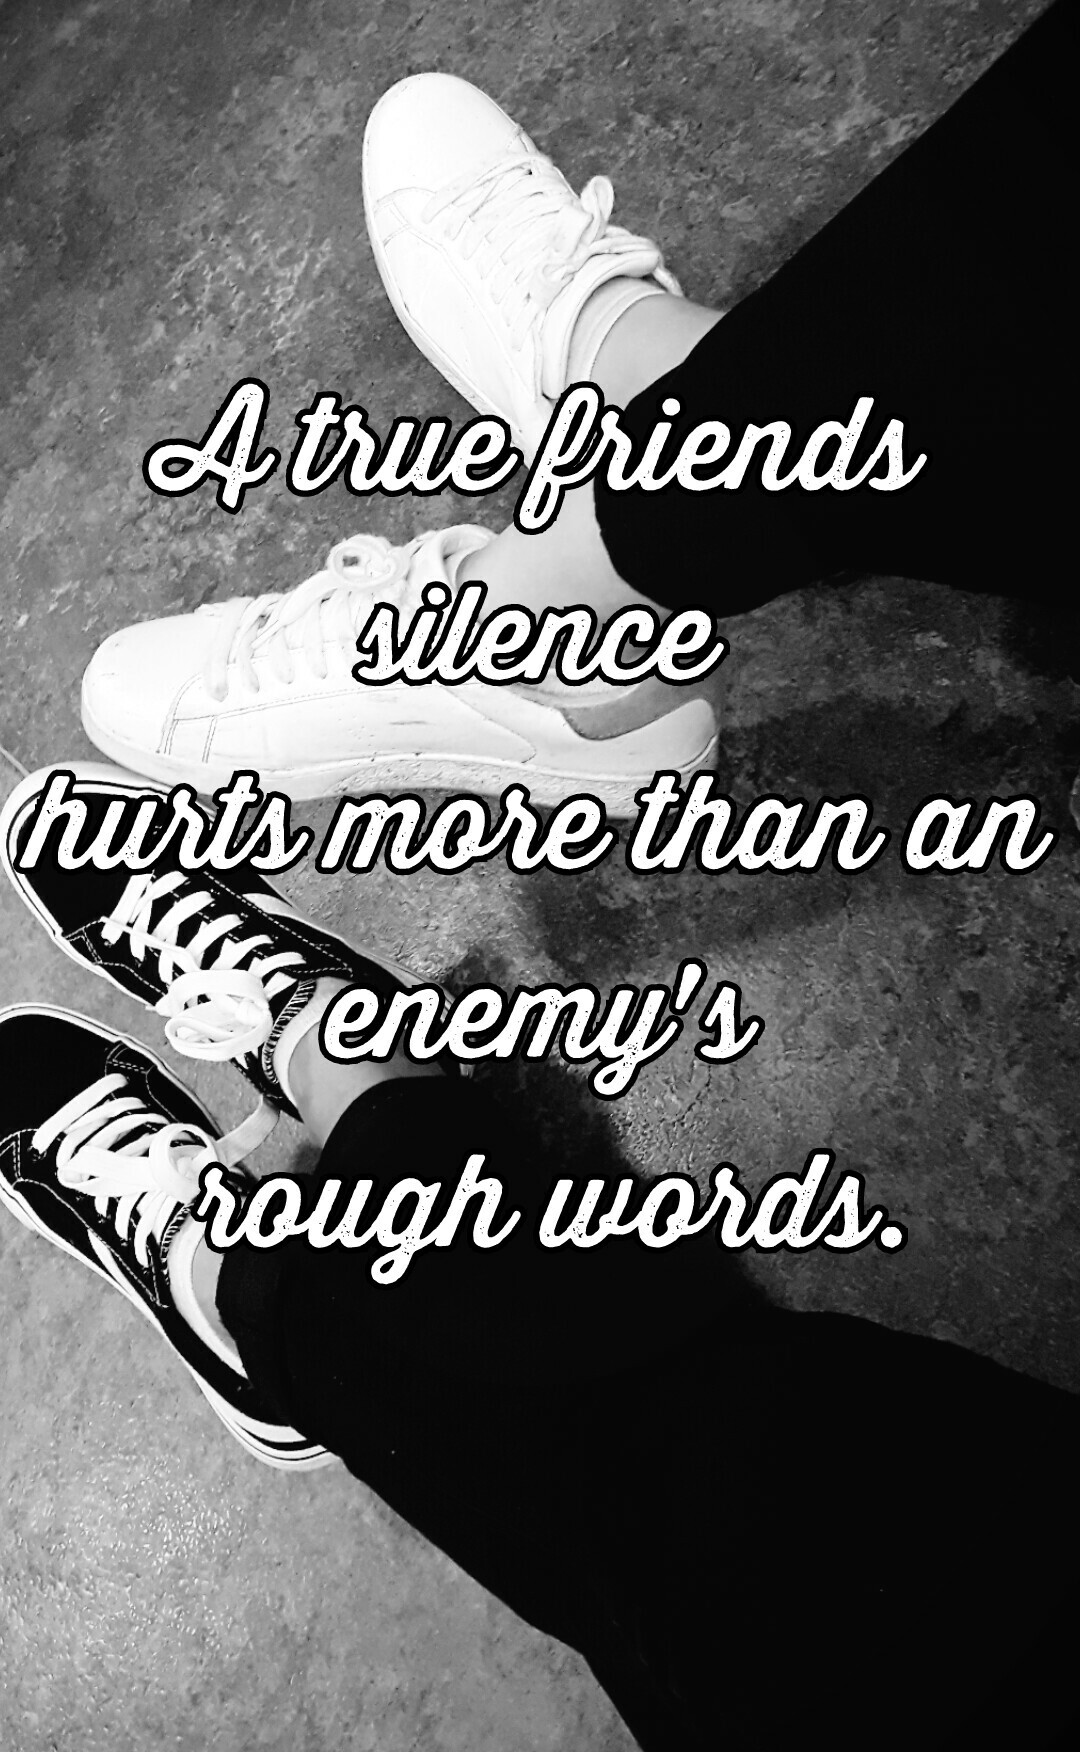 A true friends 
silence 
hurts more than an 
enemy's 
rough words.